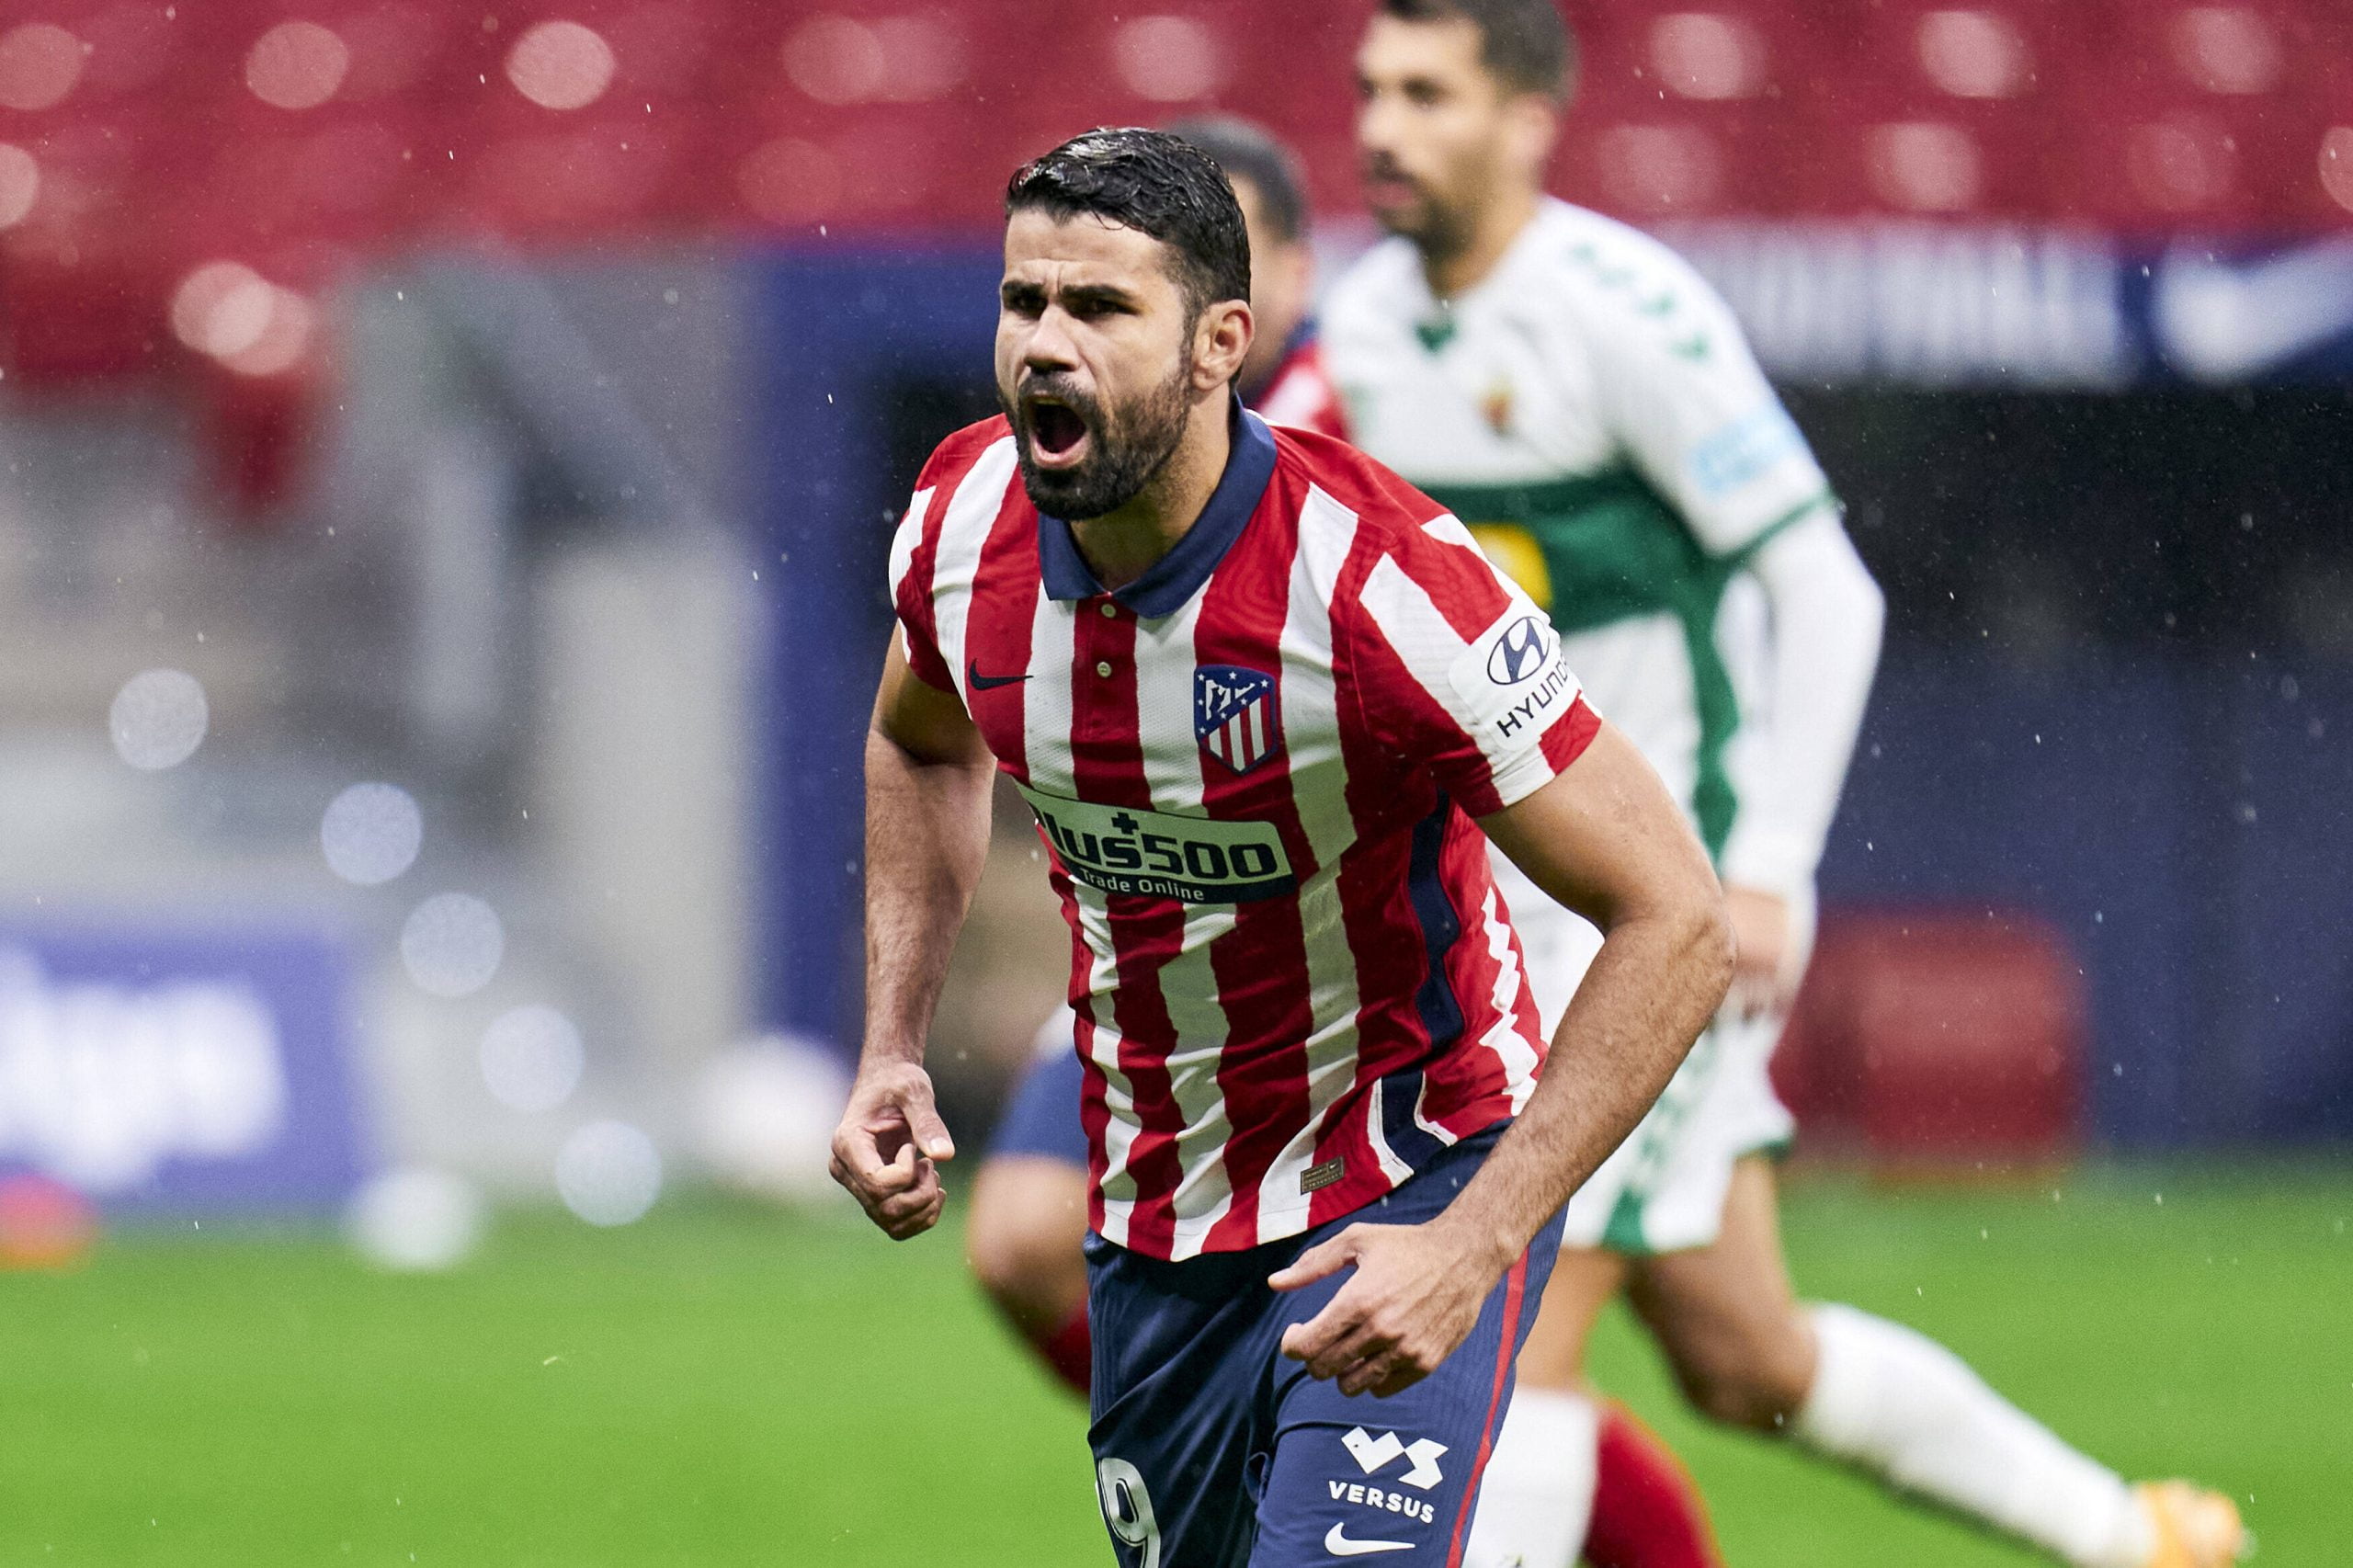 Wolves could face competition from Sao Paulo for Diego Costa who is seen in the photo